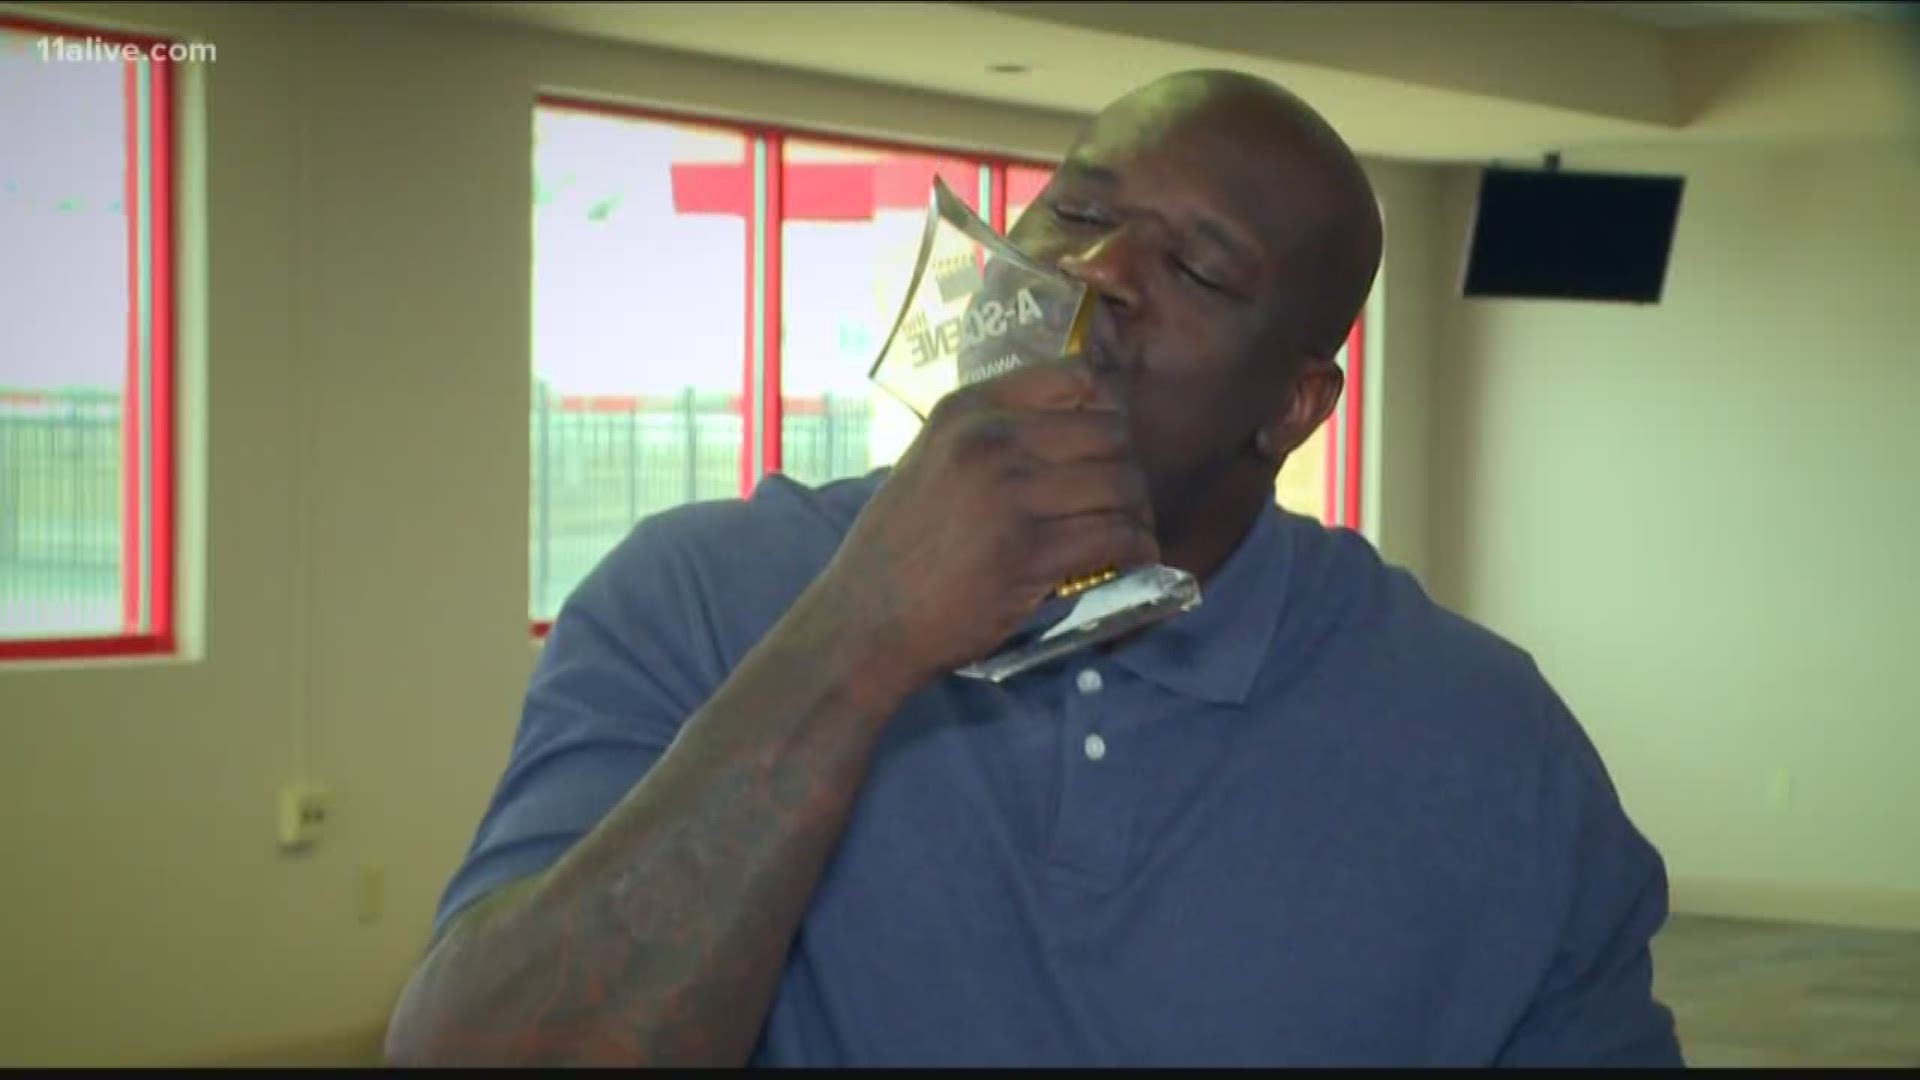 It's safe to say...Shaq was very excited about winning the award for the best Super Bowl party.